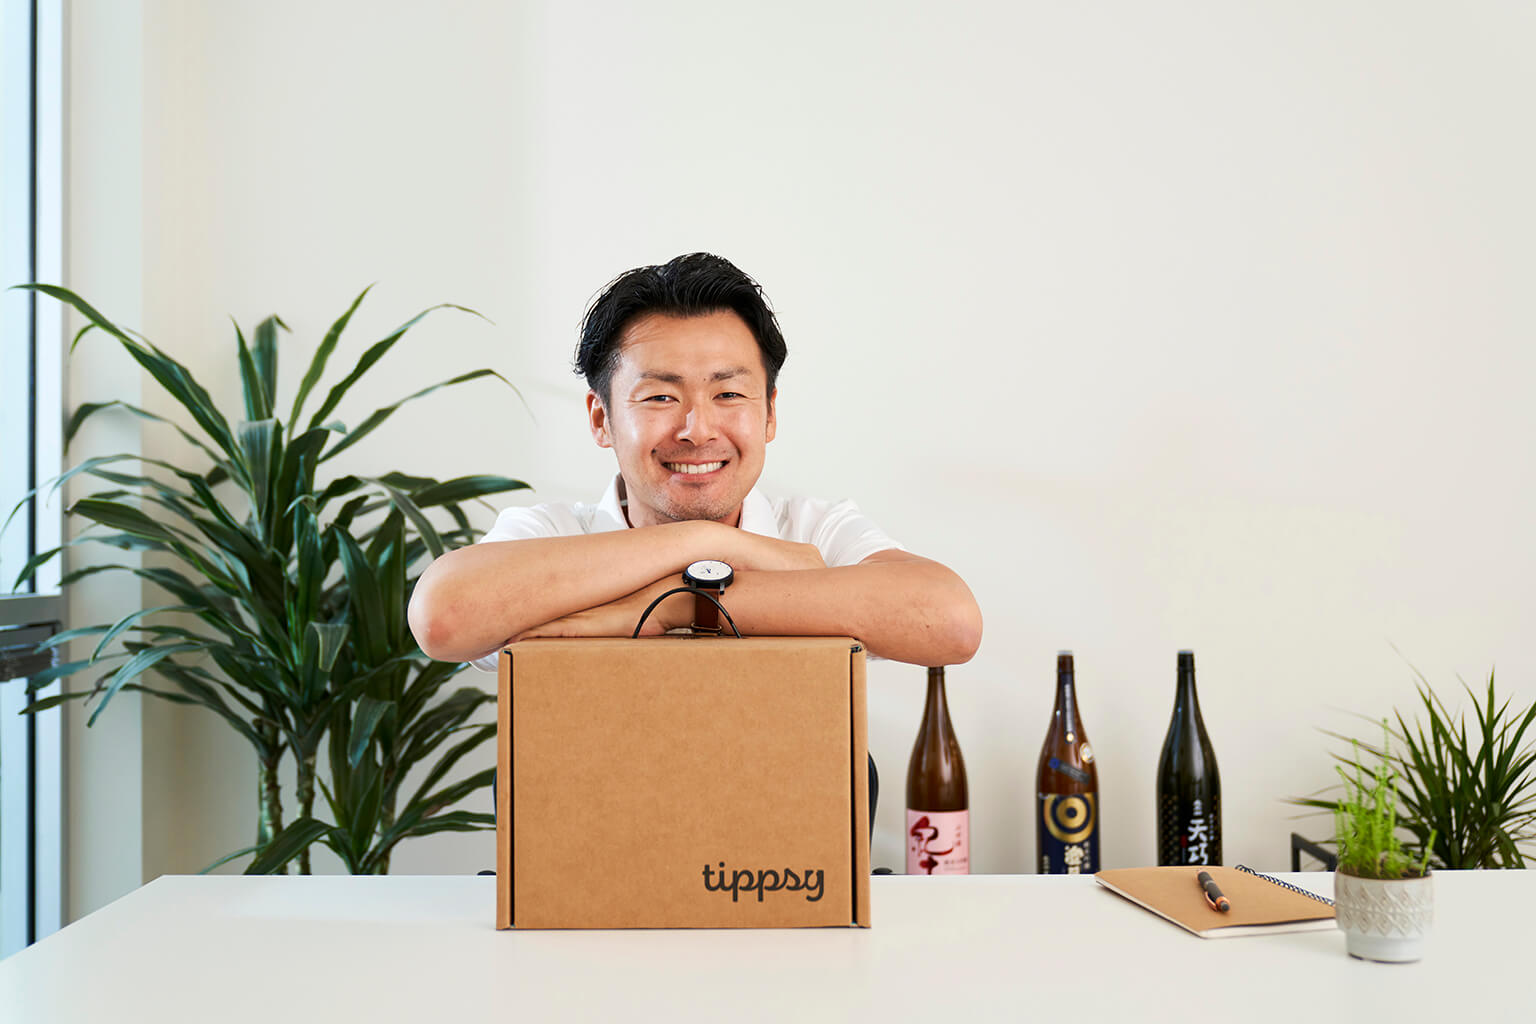 CEO Genki Ito launched TippsySake.com so Americans could access an incredible variety of sake with ease